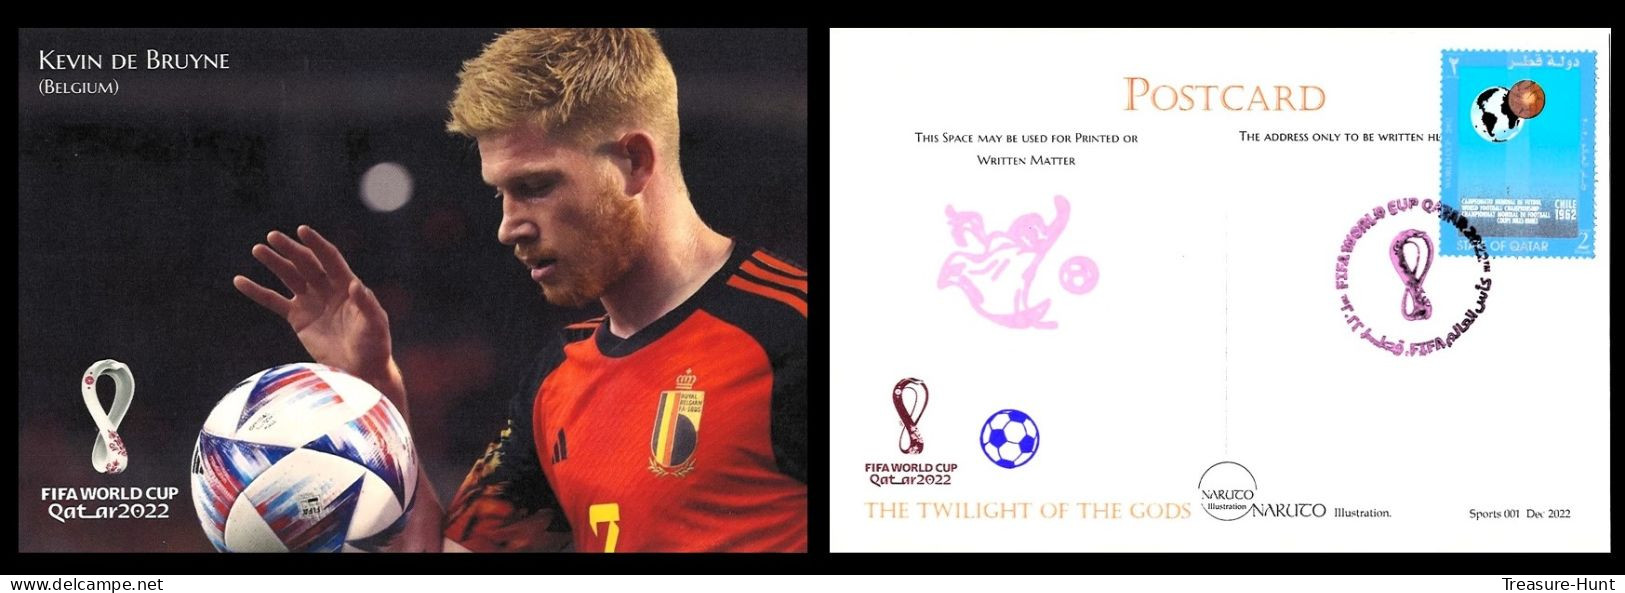 RARE Collector's Edition Picture POSTCARD, 2022 FIFA World Cup Soccer Football In Qatar, Belgium Player Kevin De Bruyne - 2022 – Qatar